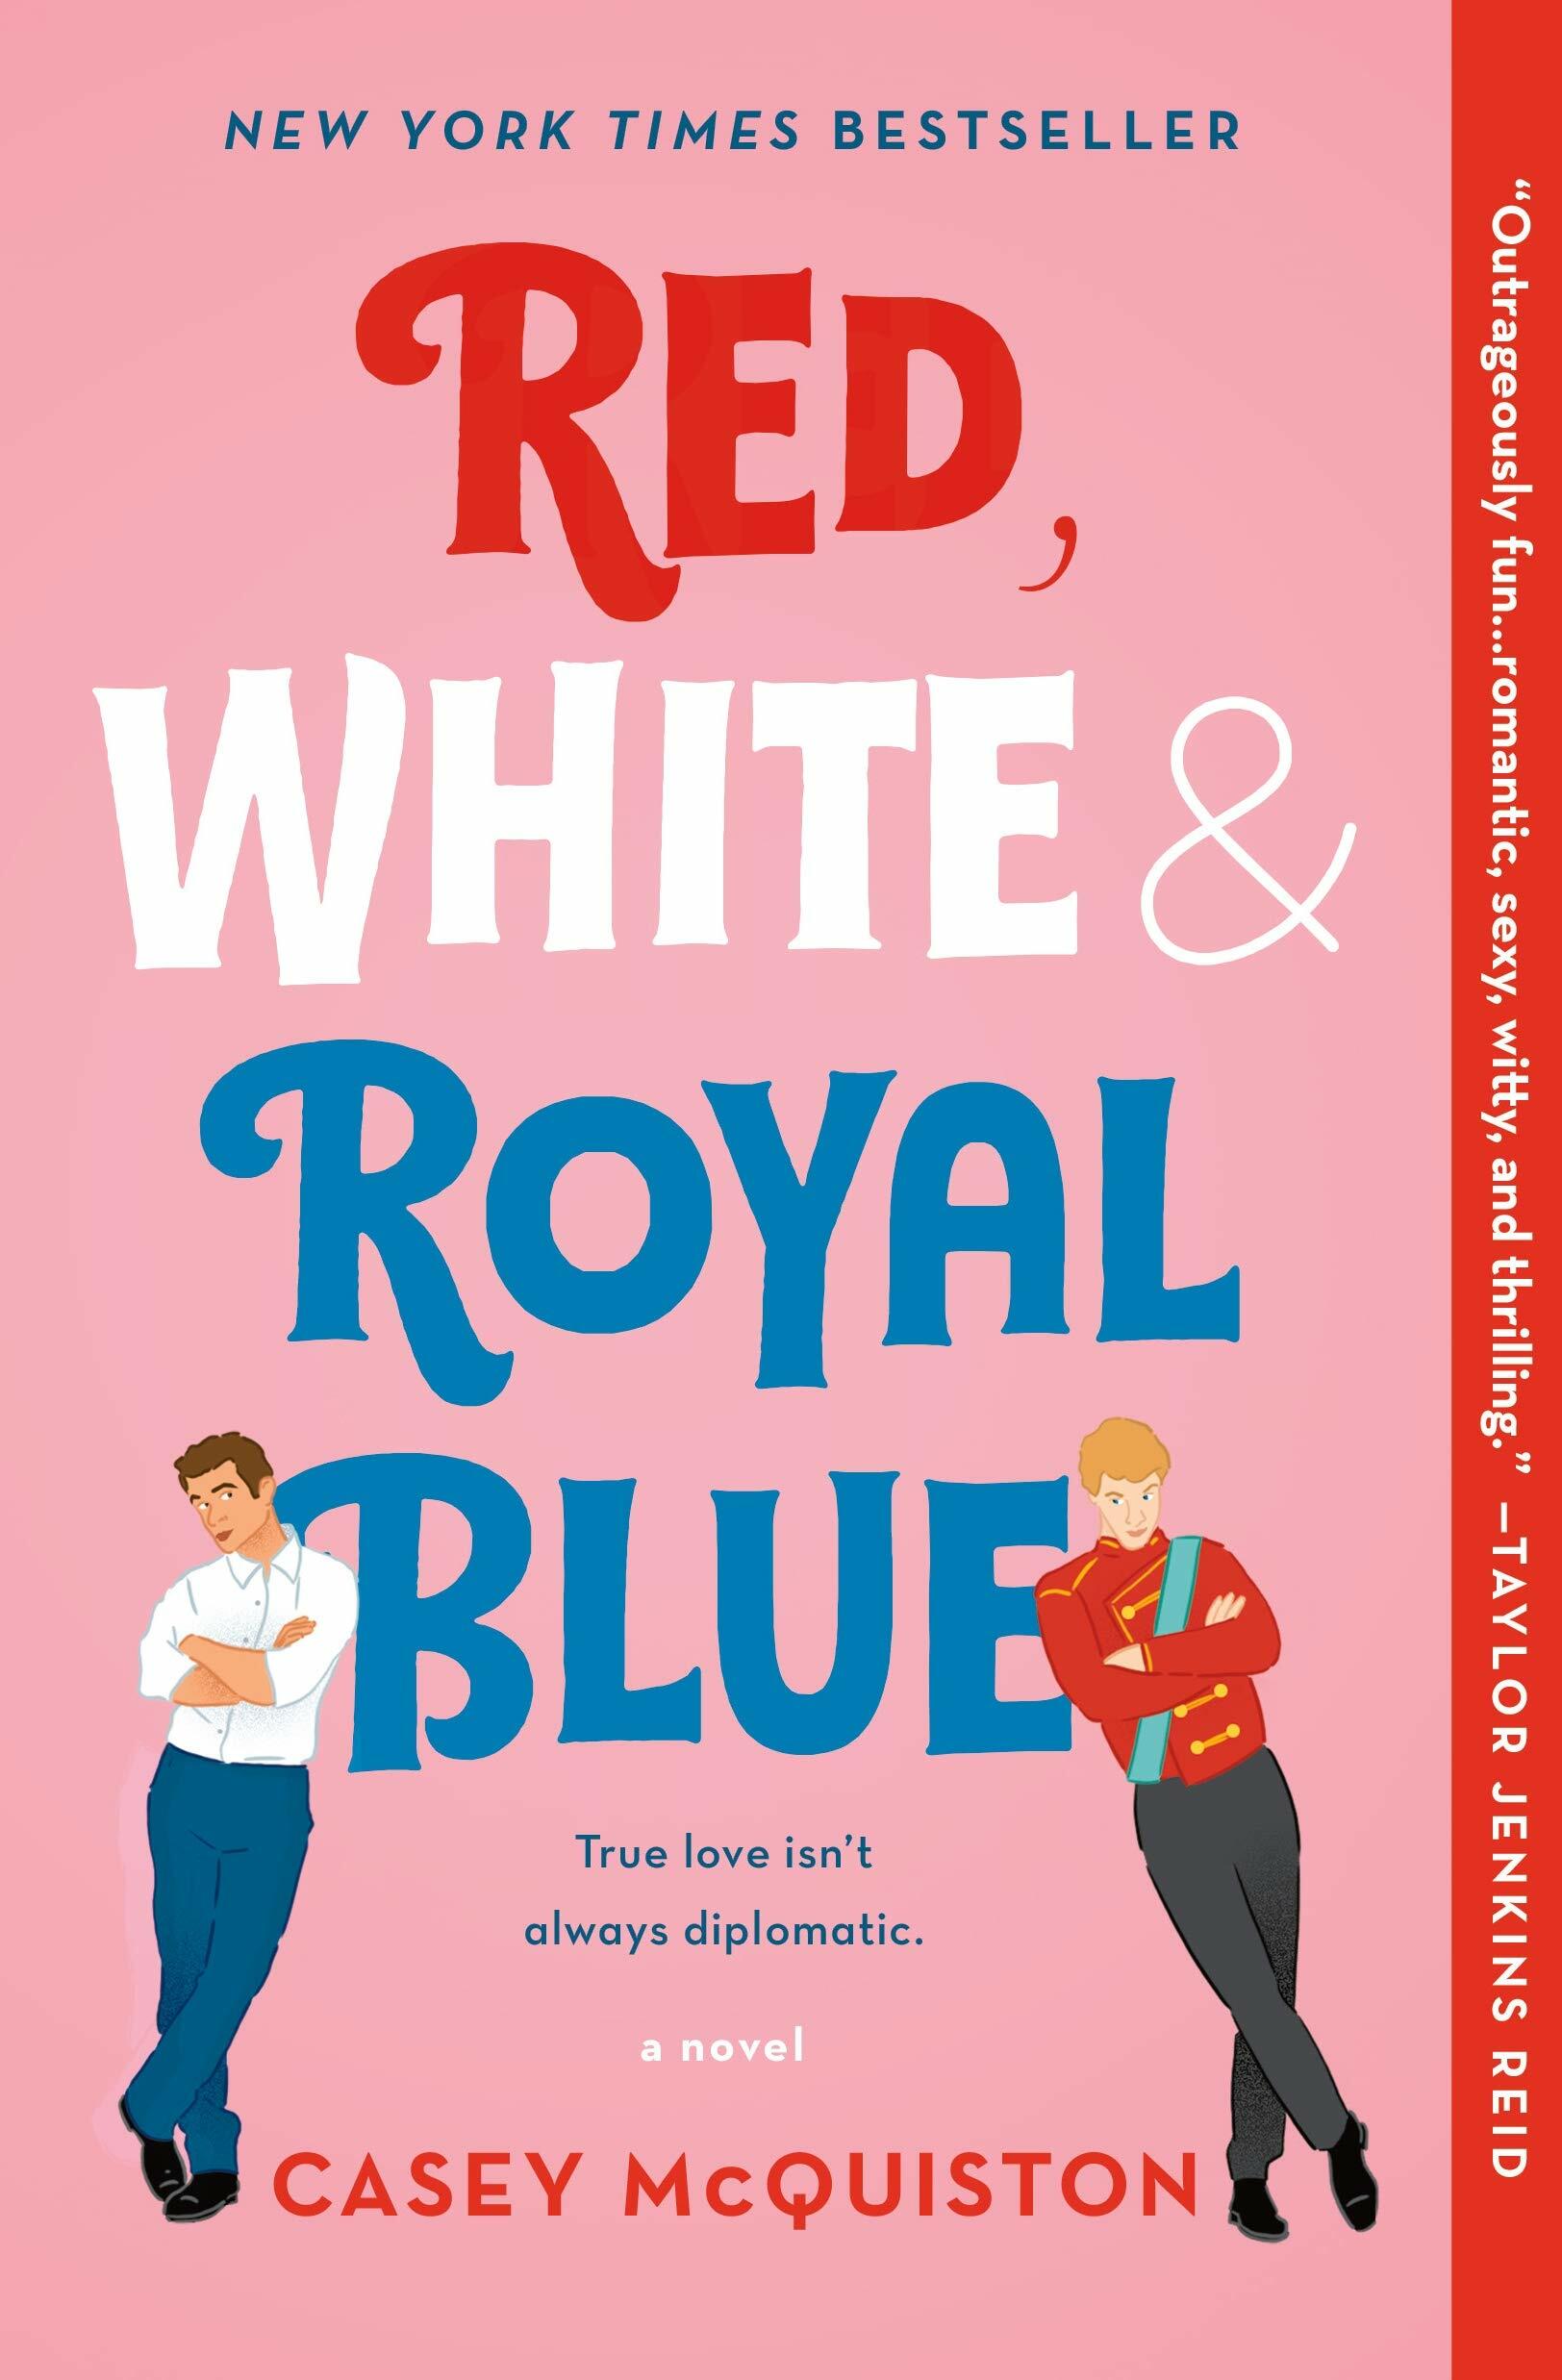 The cover of Red White & Royal Blue